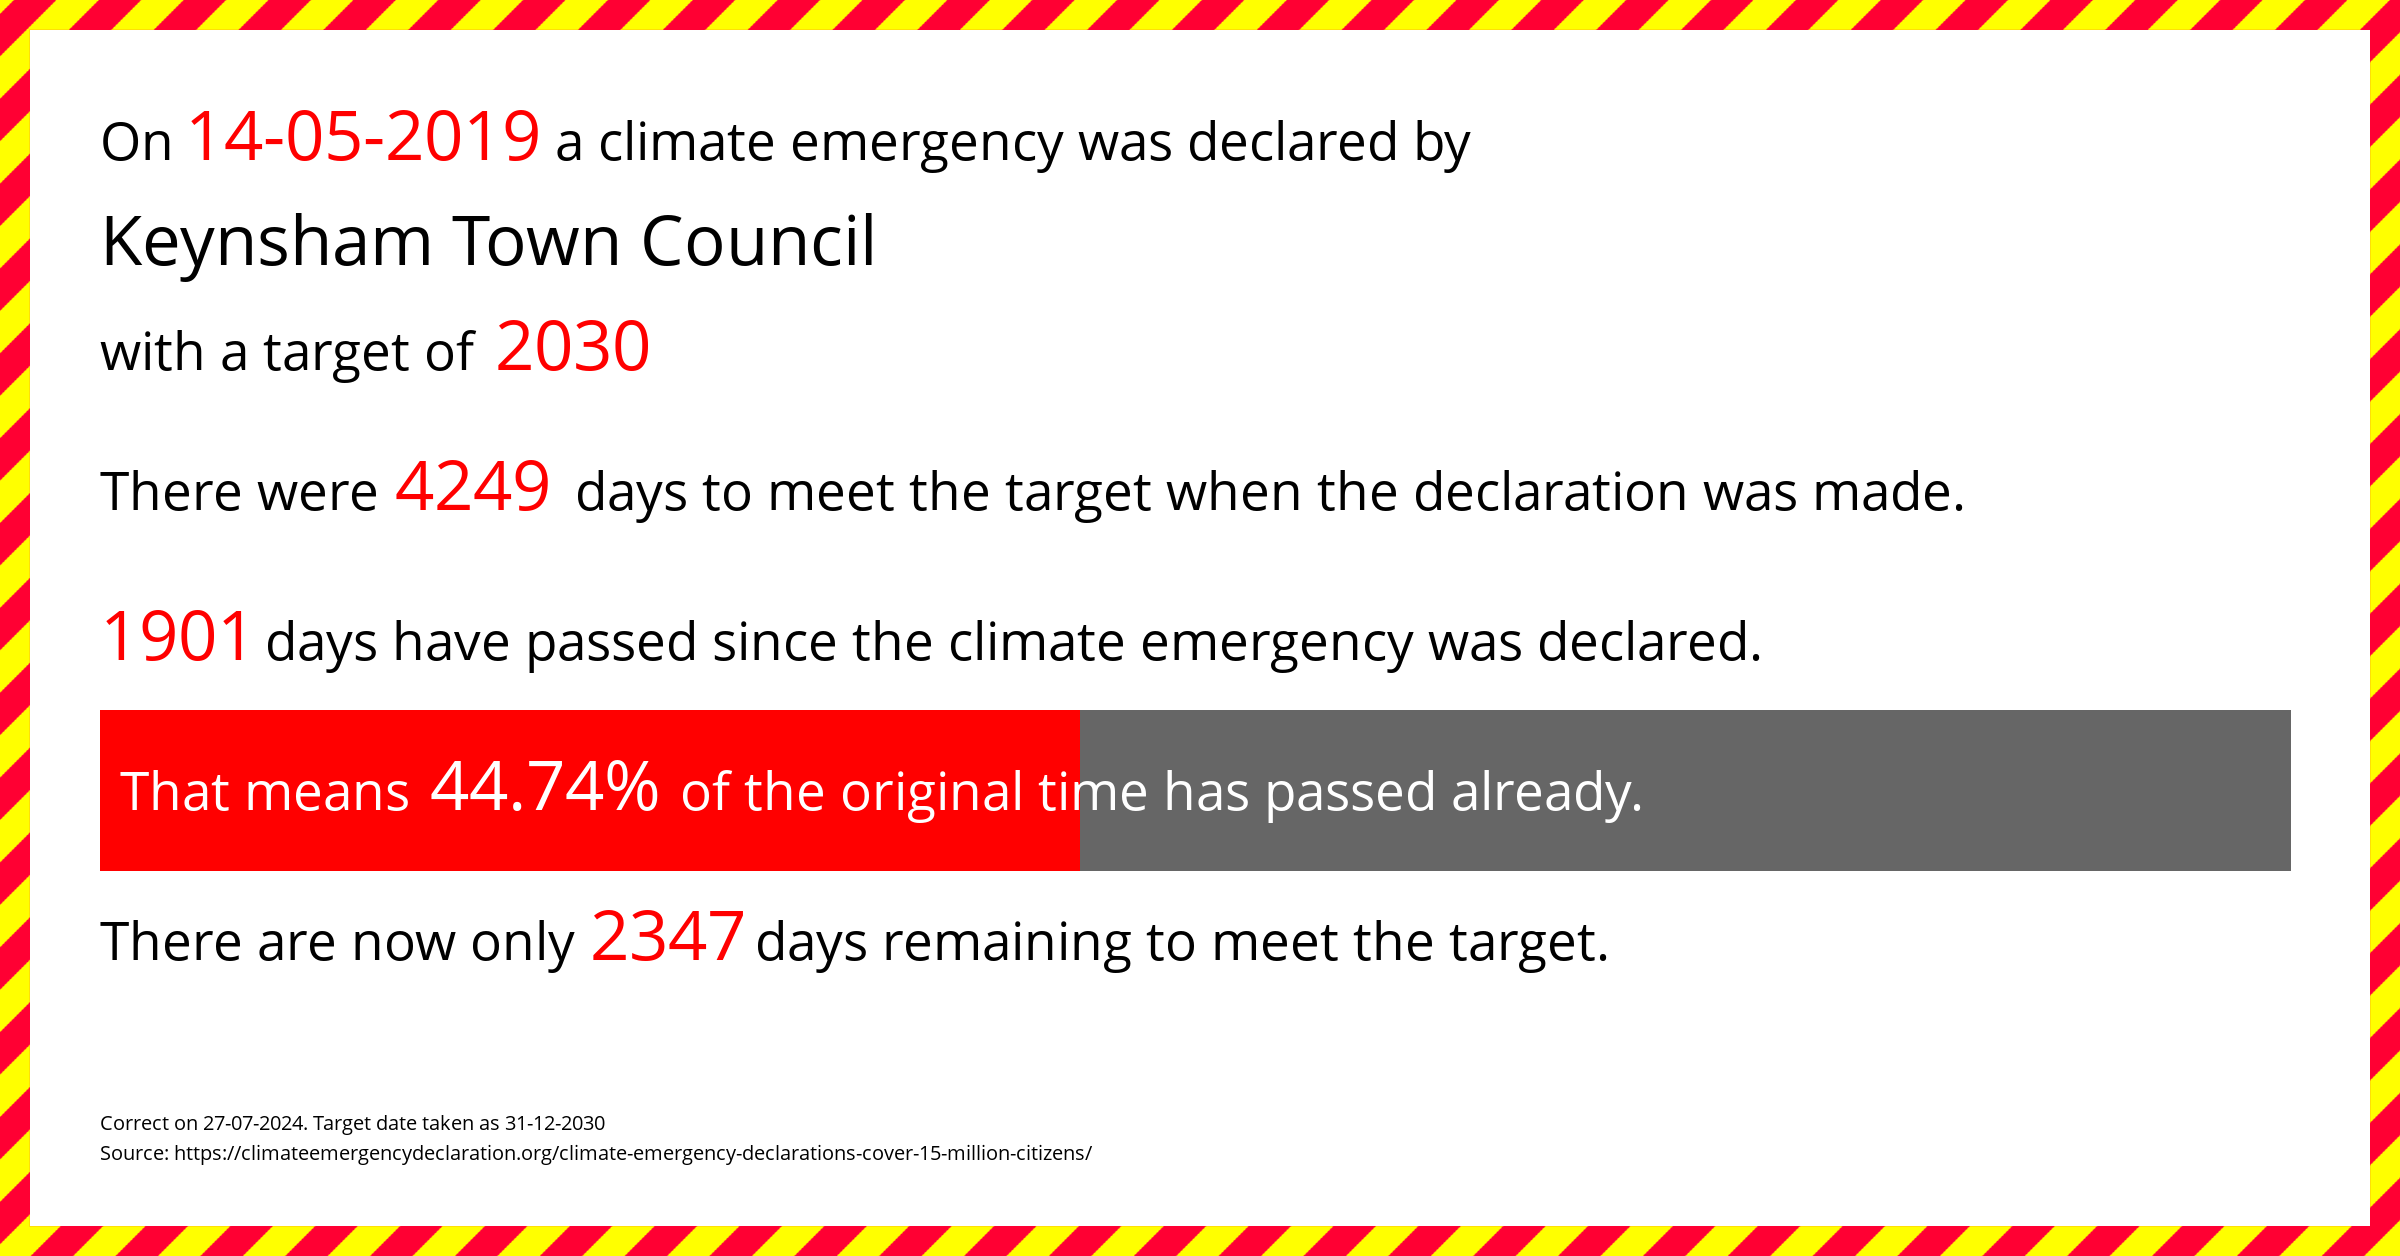 Keynsham Town Council  declared a Climate emergency on Tuesday 14th May 2019, with a target of 2030.